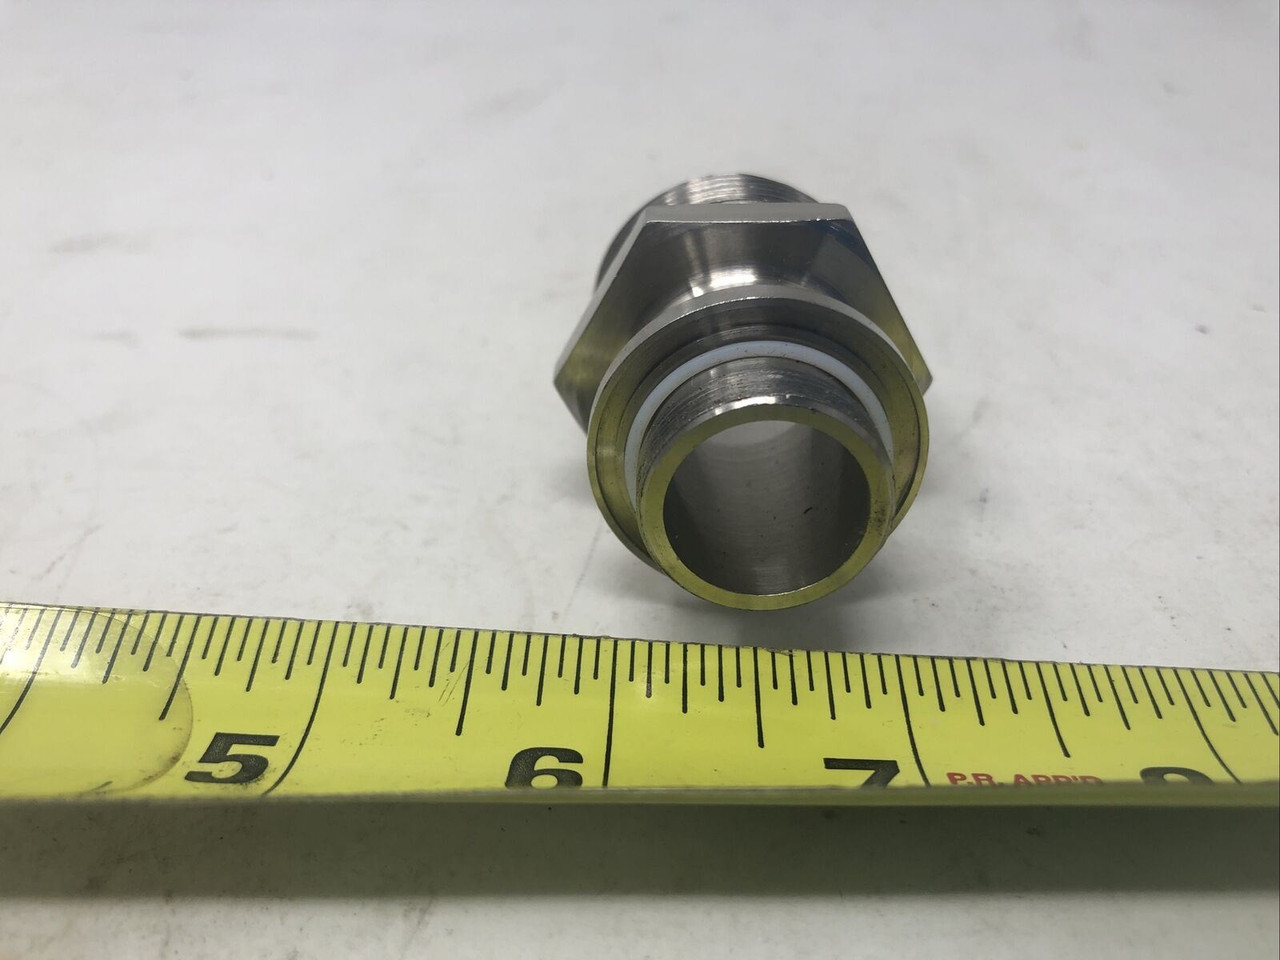 SWAGELOK FITTING MALE 5/8 TO ~7/8 MALE CONNECTOR COMPRESSION - PREOWNED